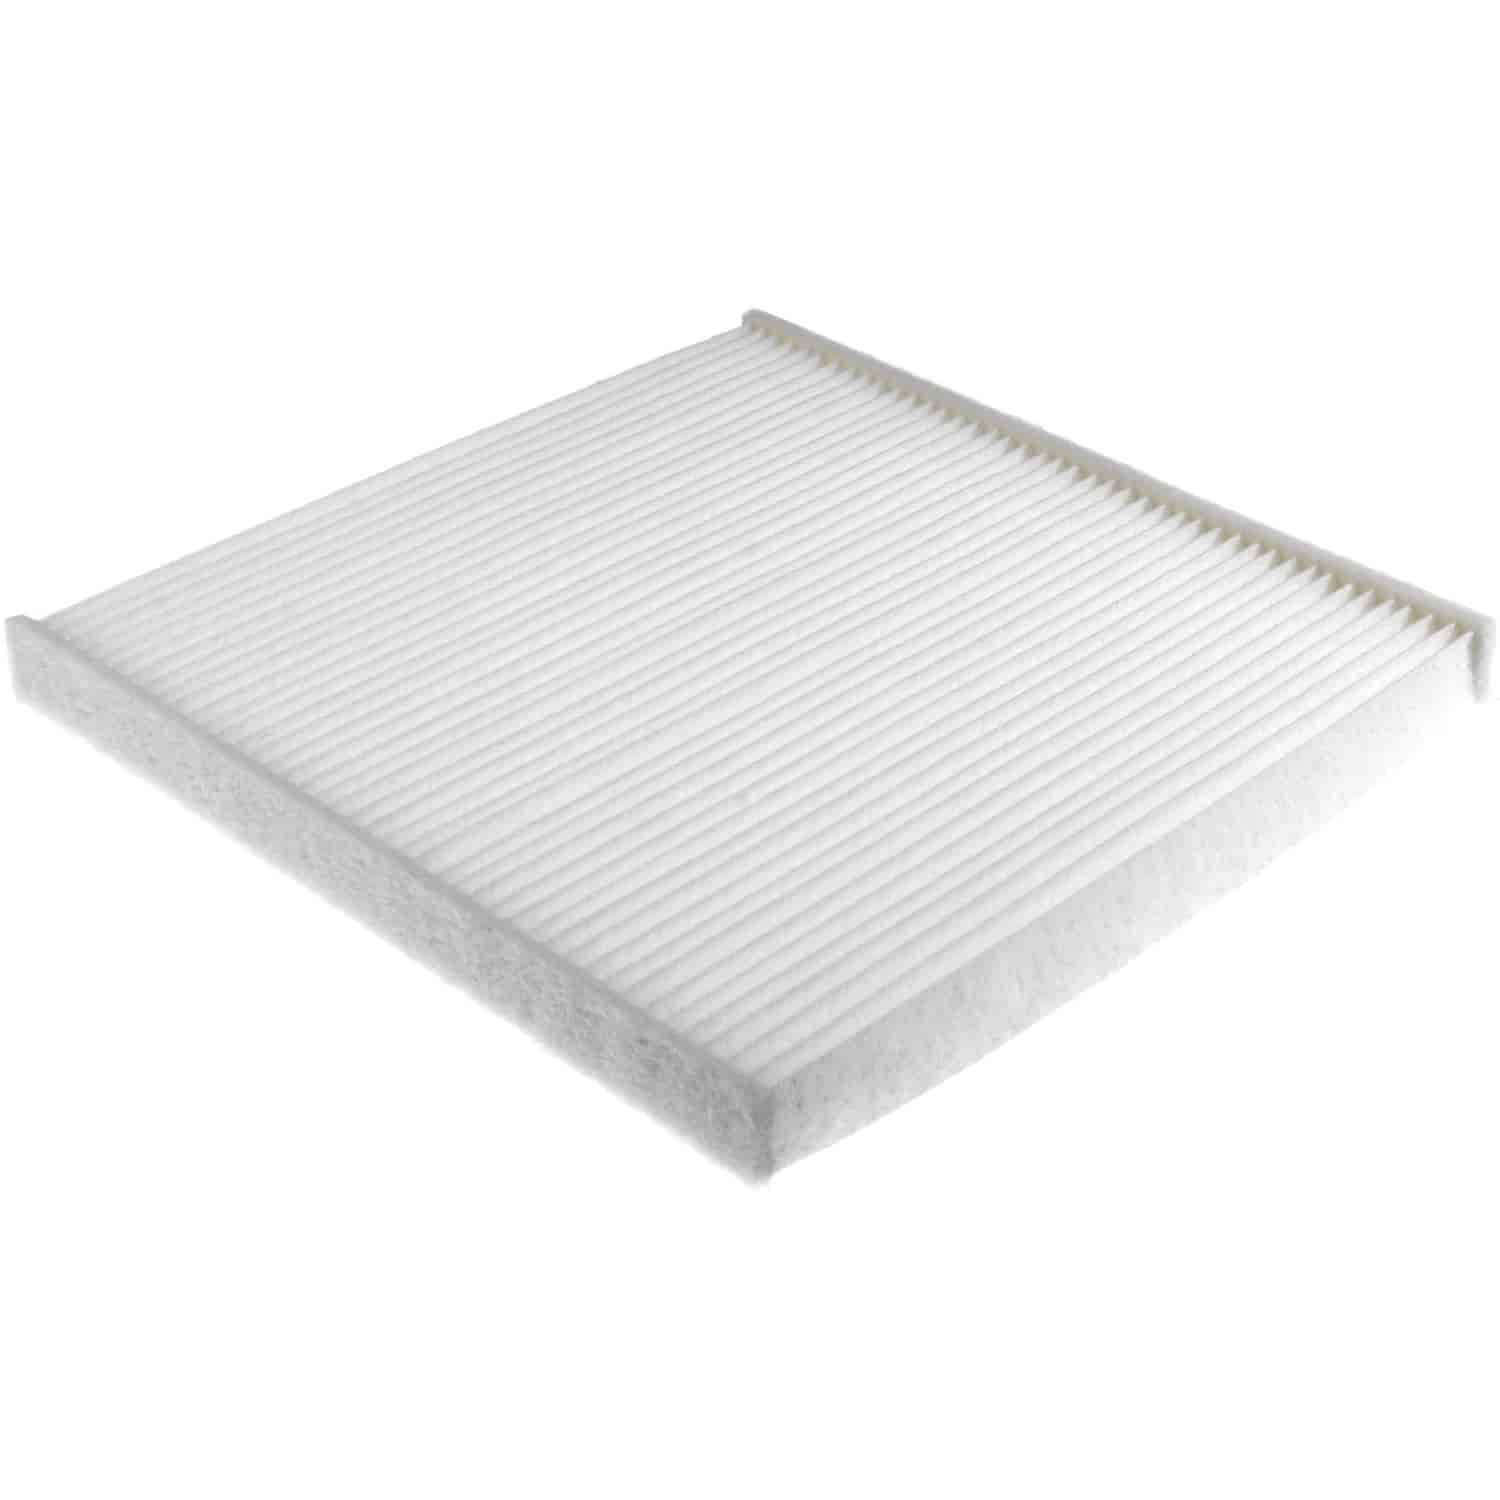 Mahle Cabin Air Filter 2000-2014 Fits Various